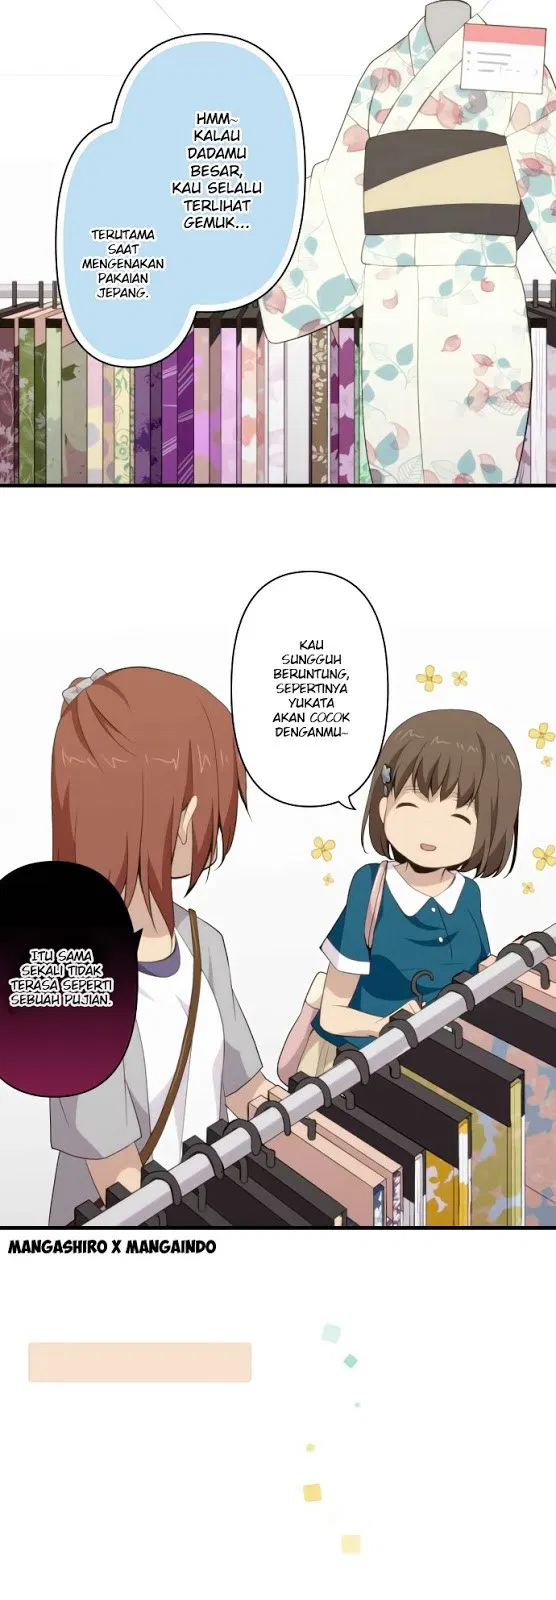 ReLIFE Chapter 101